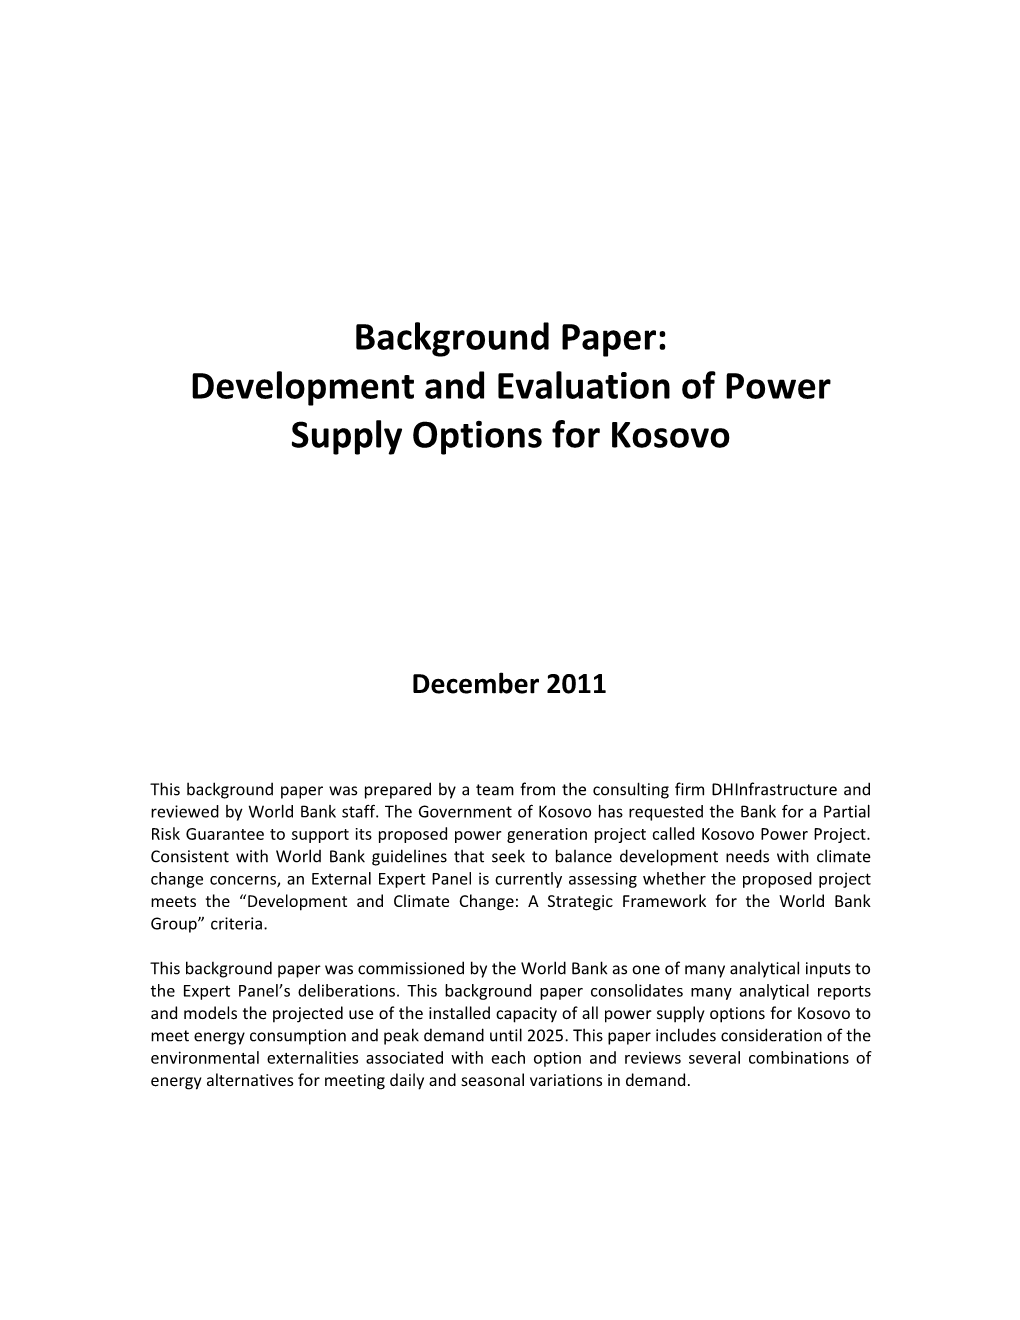 Development and Evaluation of Power Supply Options for Kosovo